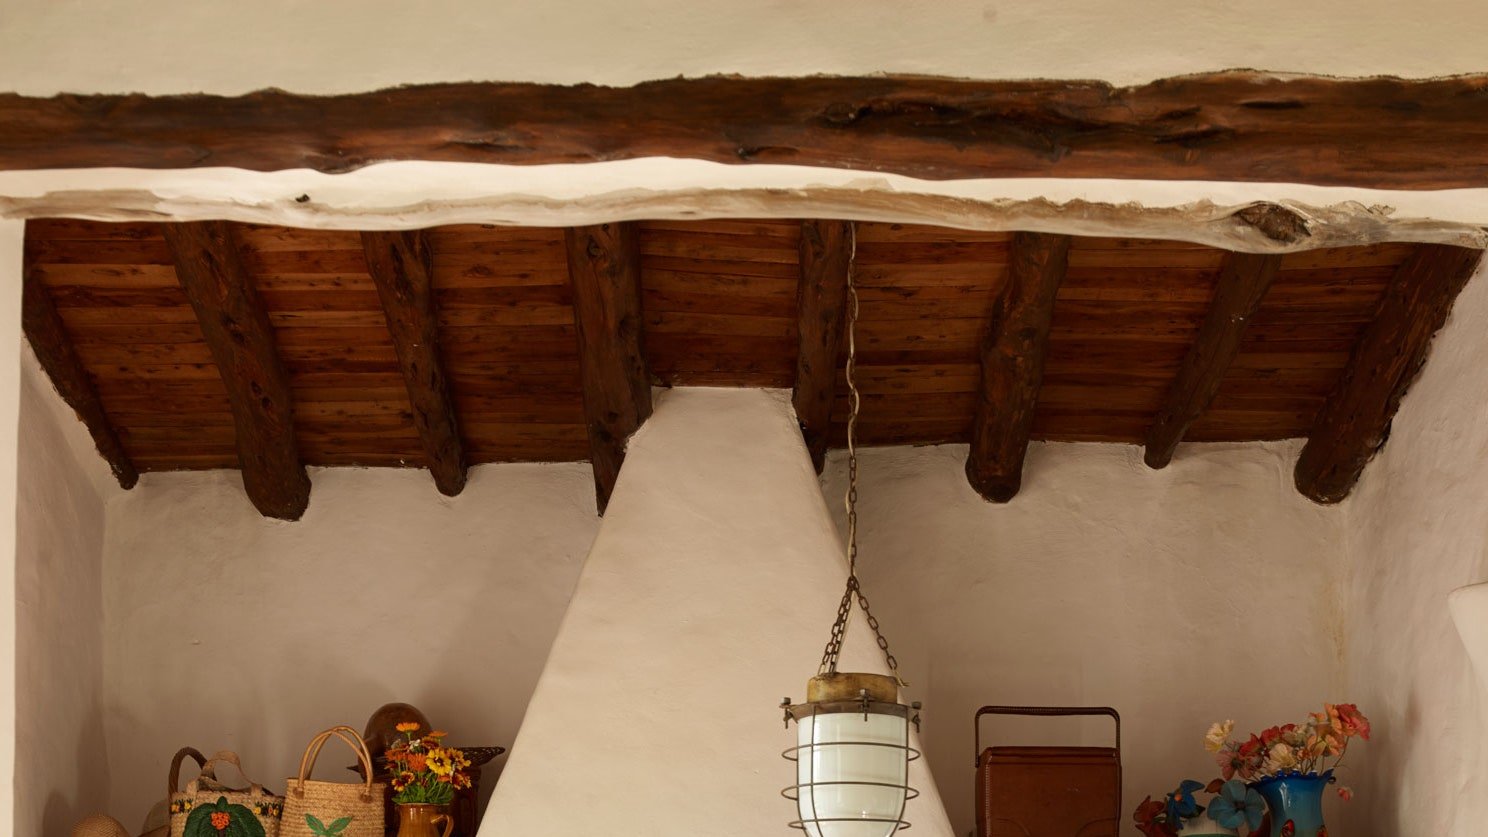 A rustic Ibizan finca filled with an unconventional collection of furniture and objects